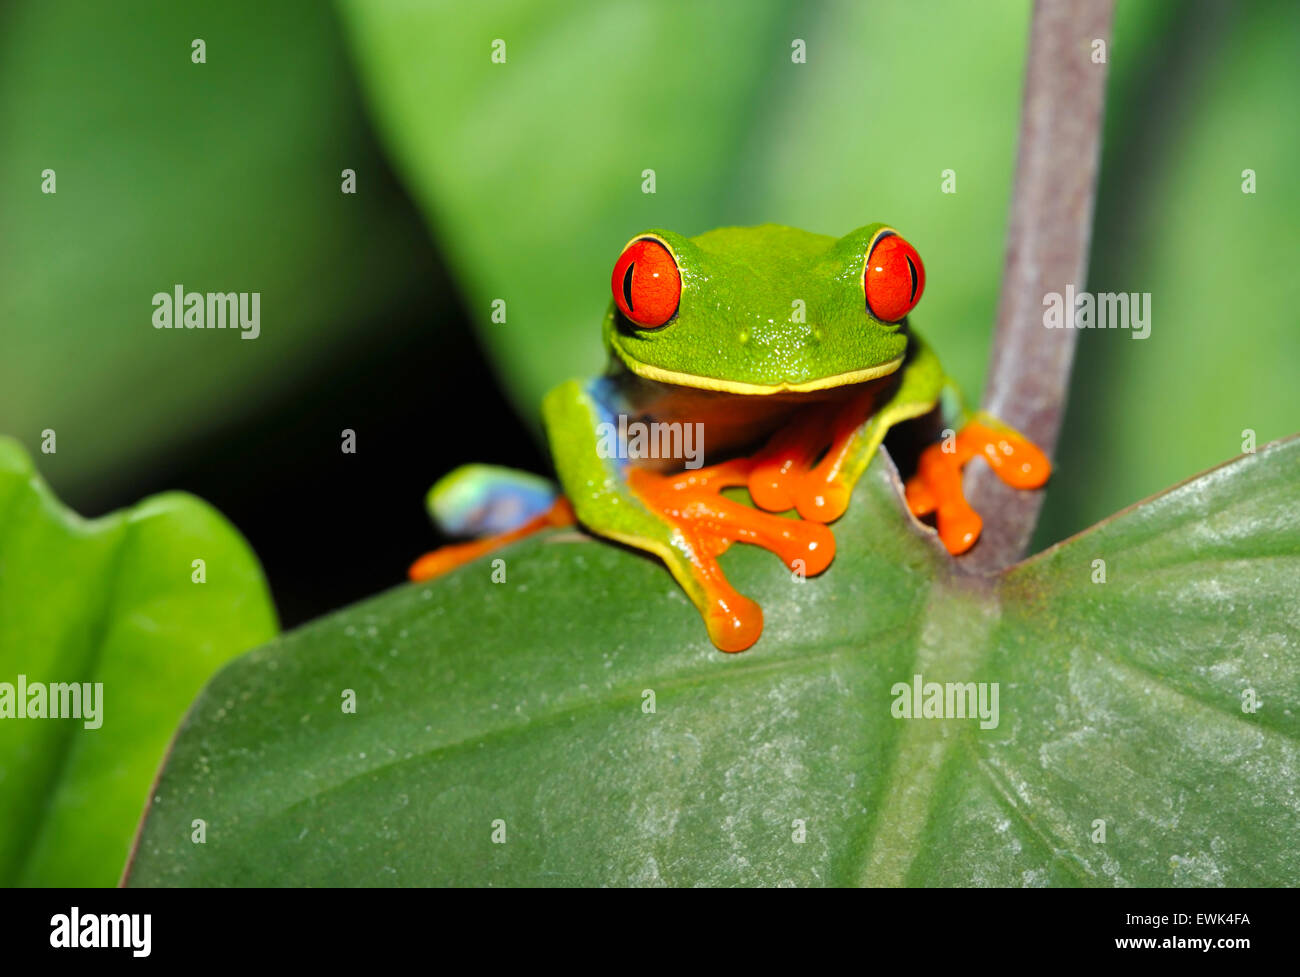 red eyed tree frog or red eyed green frog or agalychnis callidryas curiously looking sitting on green leaf,corocovado costa rica Stock Photo